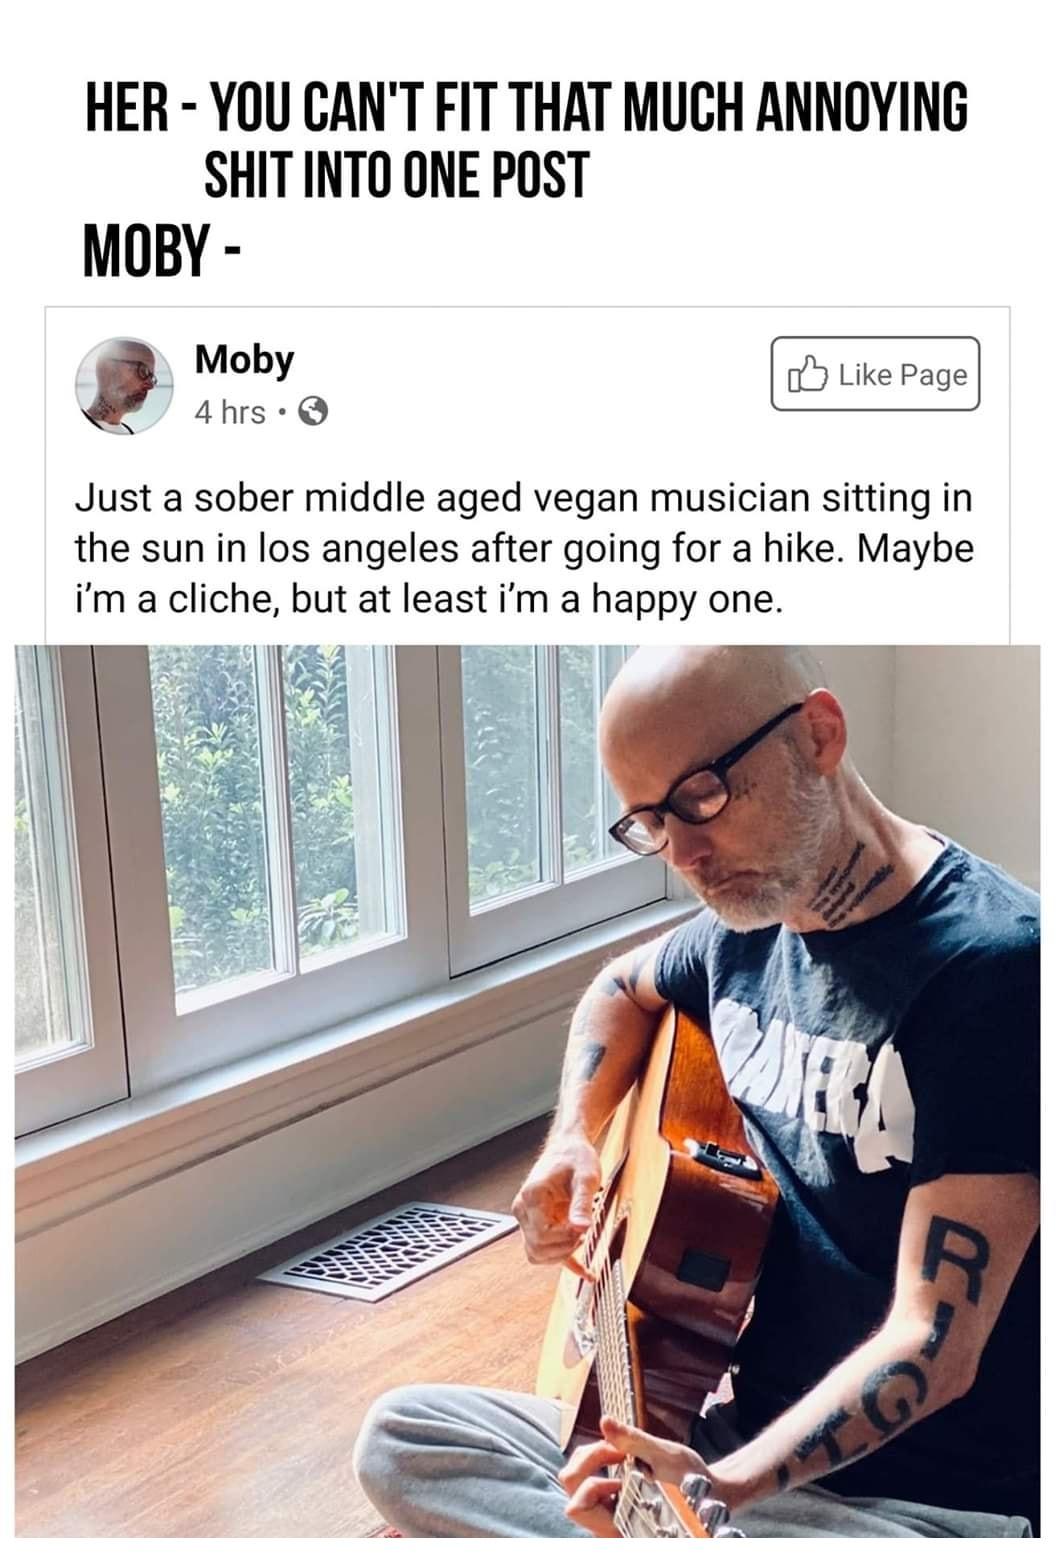 funny memes and pics - moby meme - Her You Can'T Fit That Much Annoying Shit Into One Post Moby Moby Page 4 hrs Just a sober middle aged vegan musician sitting in the sun in los angeles after going for a hike. Maybe i'm a cliche, but at least i'm a happy 